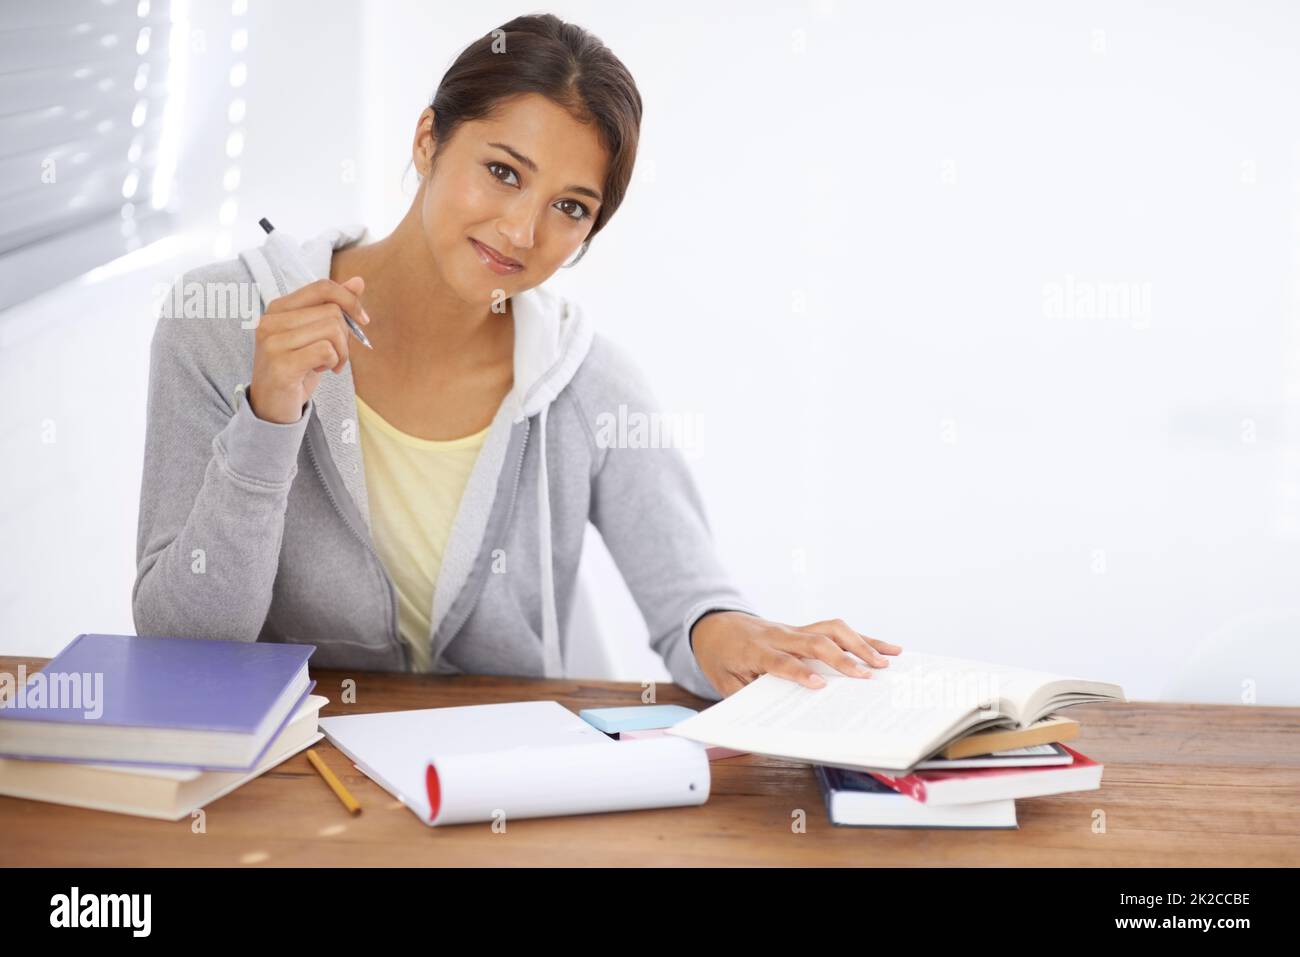 Hitting the books with a positive attitude. A pretty young university student studying for her finals in her dorm room. Stock Photo